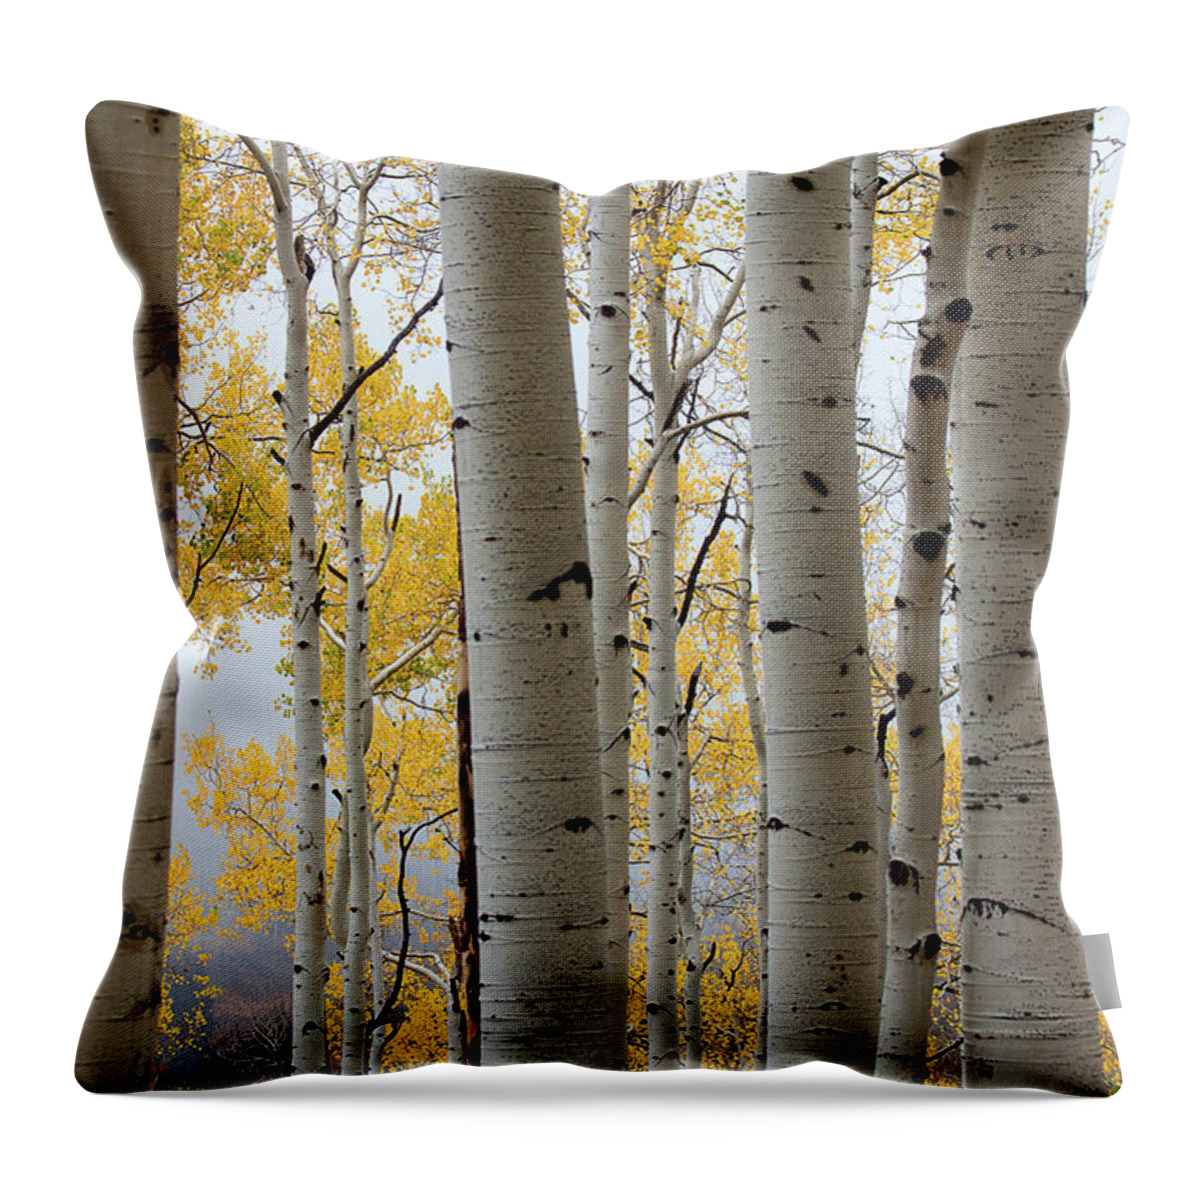 Autumn Colors Throw Pillow featuring the photograph Rainy Day Aspen by Jim Garrison